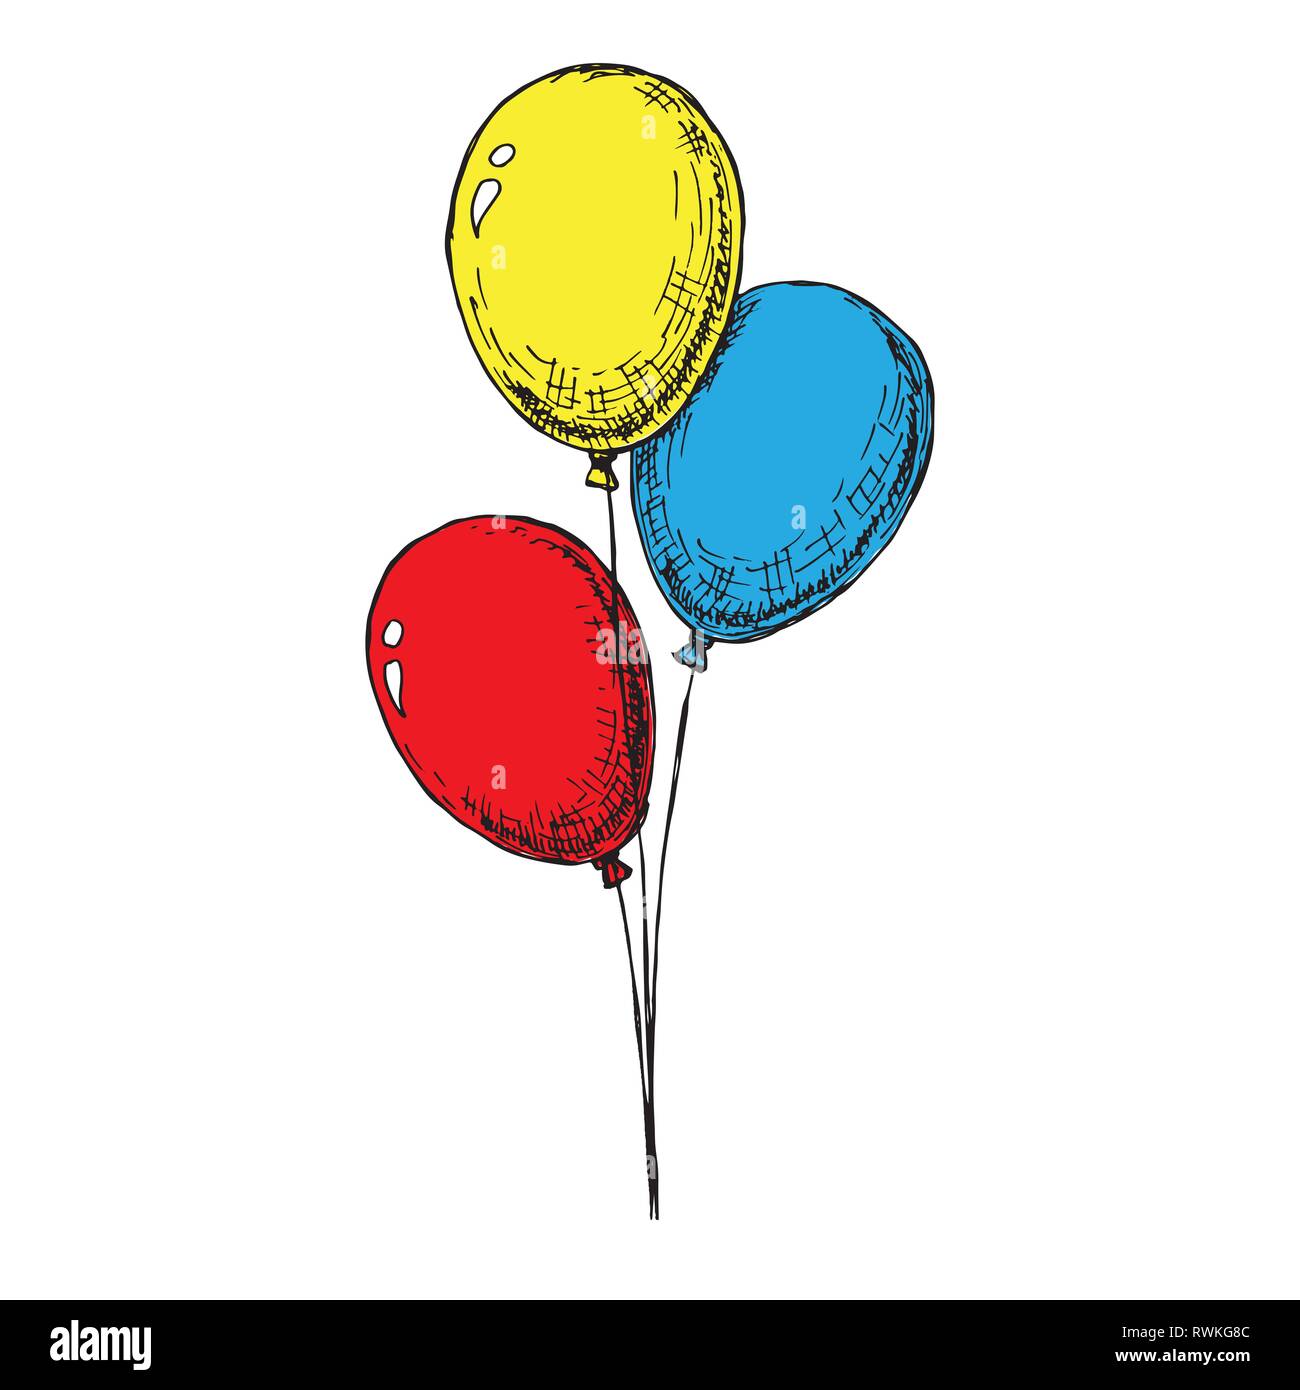 https://c8.alamy.com/comp/RWKG8C/three-balloons-on-a-string-hand-drawn-isolated-on-a-white-background-vector-illustration-RWKG8C.jpg